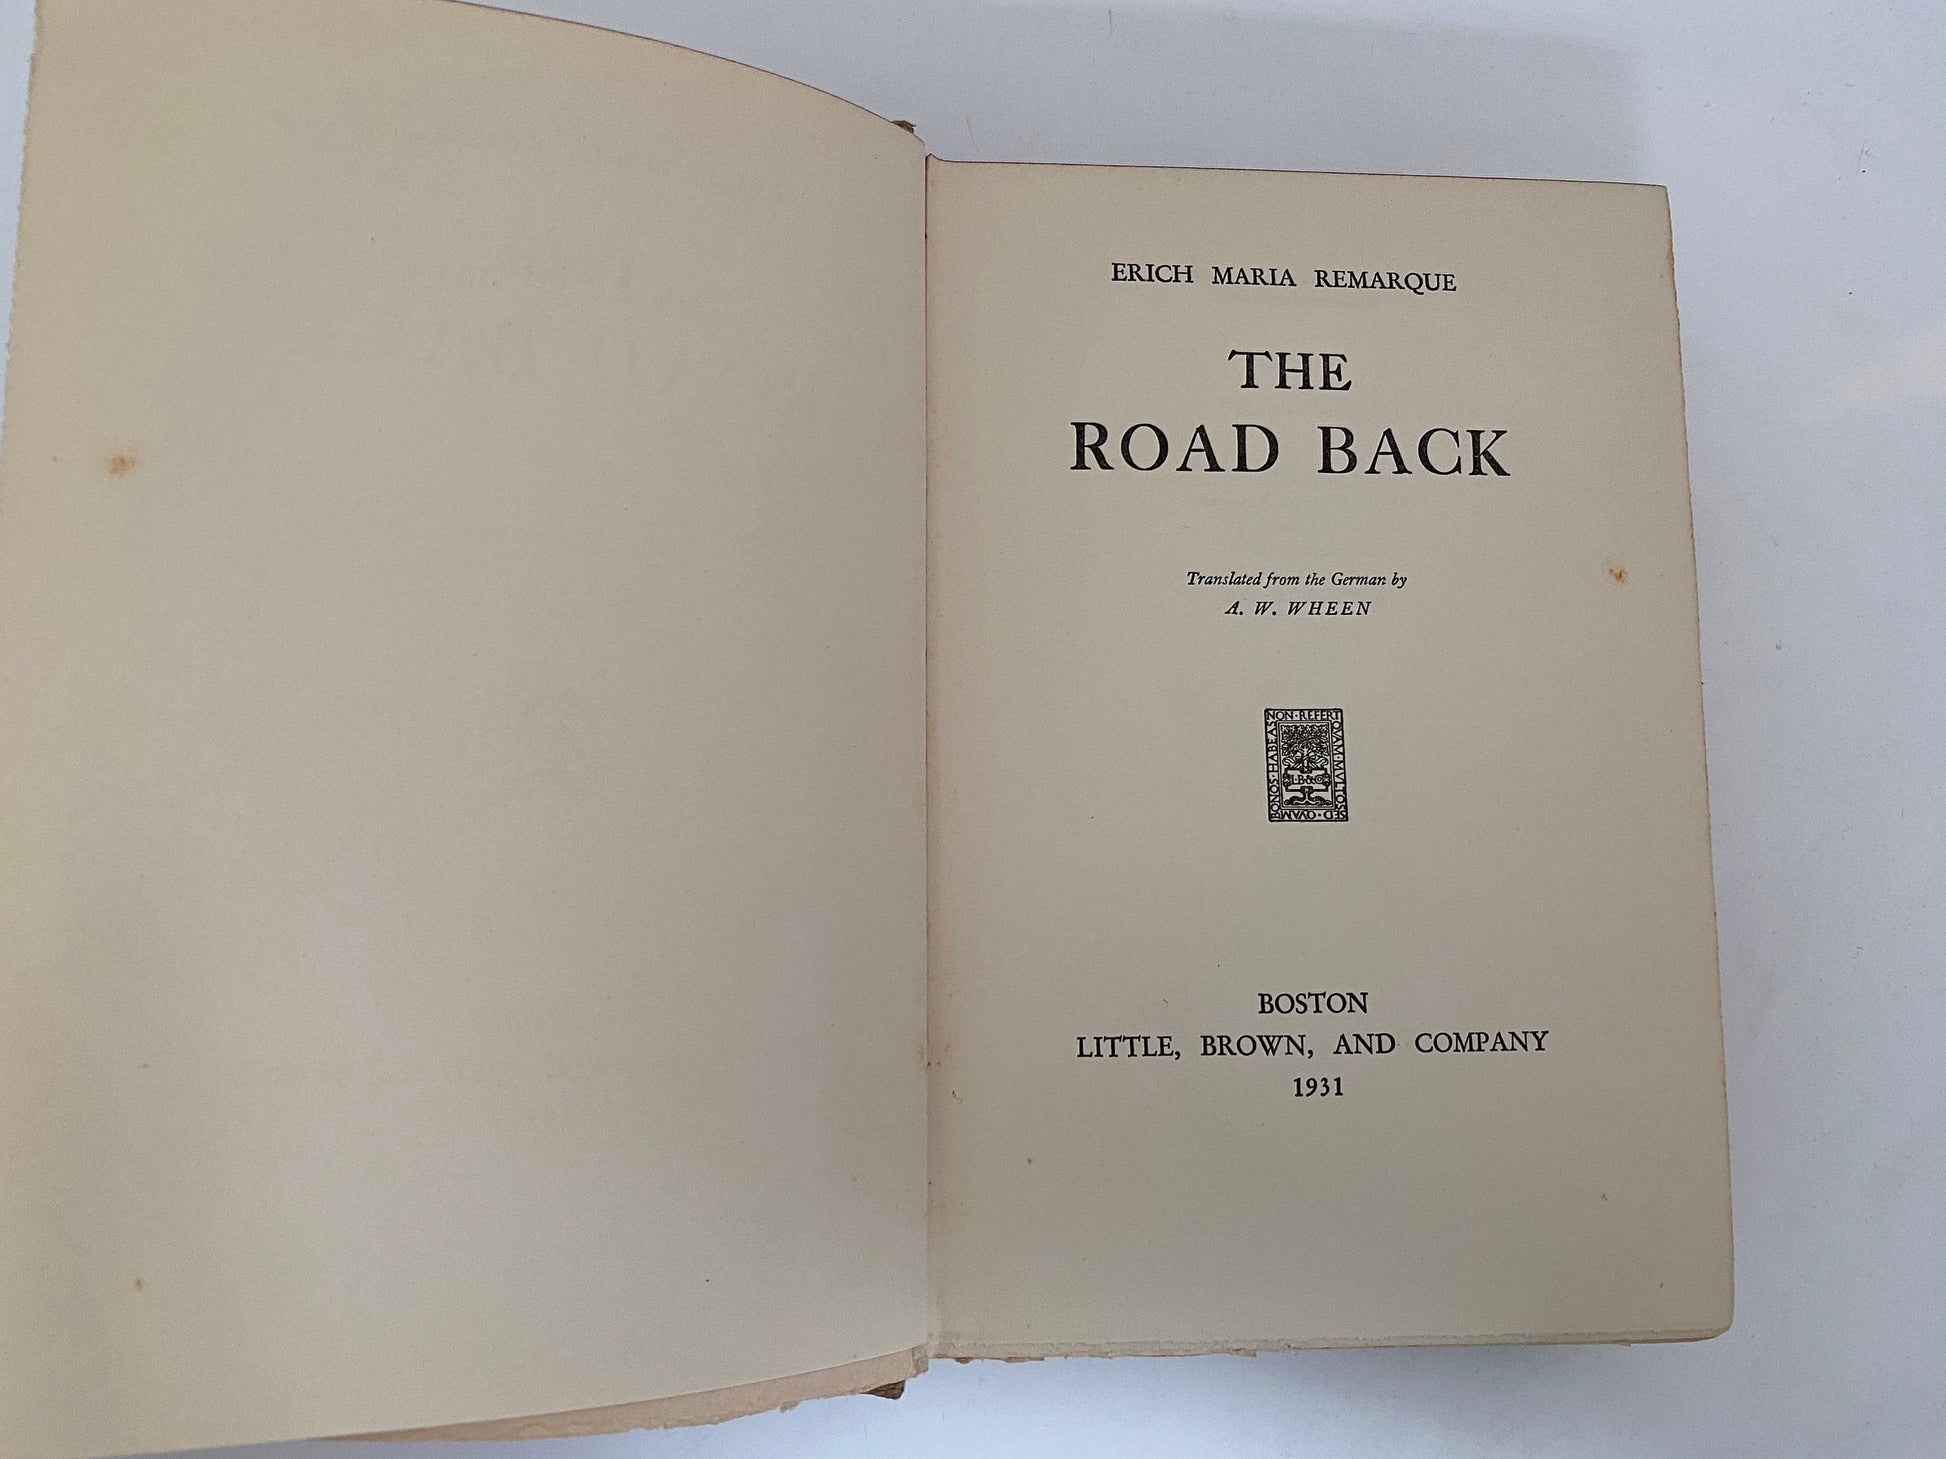 The Road Back by Erich Maria Remarque